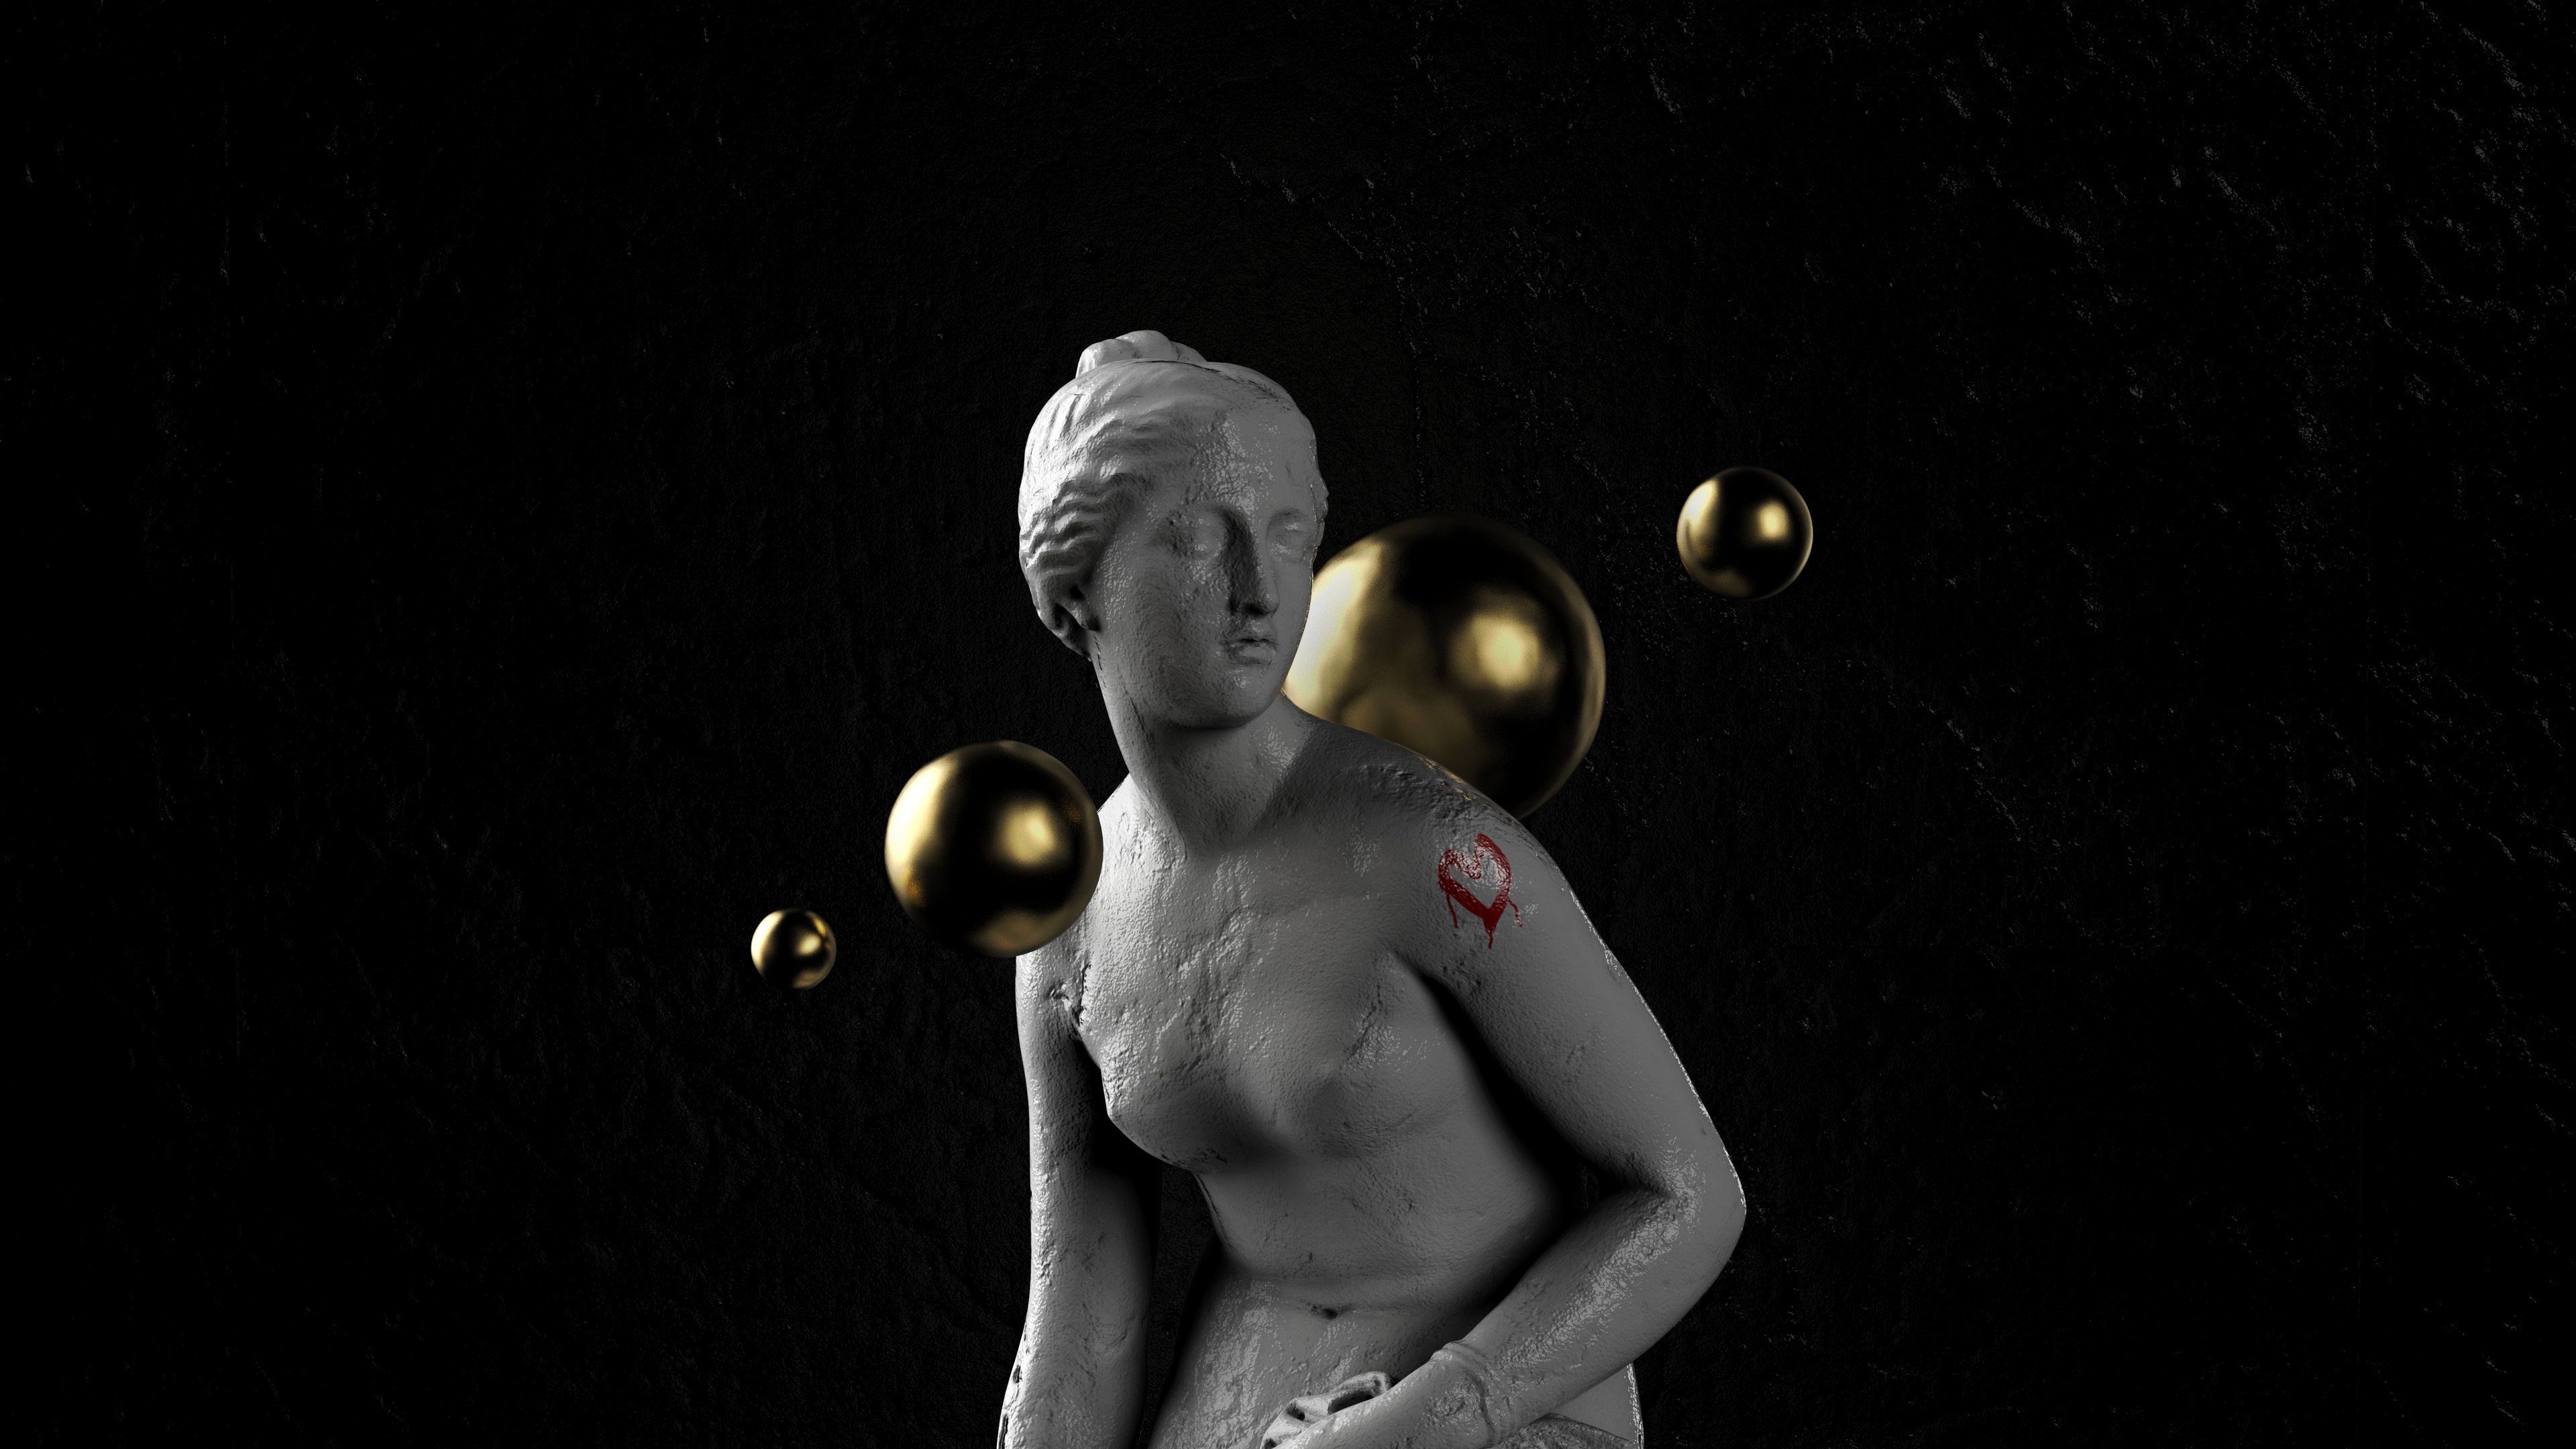 Wallpaper / 3D, render, statue, Aphrodite, marble, gold, heart, women, classical art, texture, simple background free download